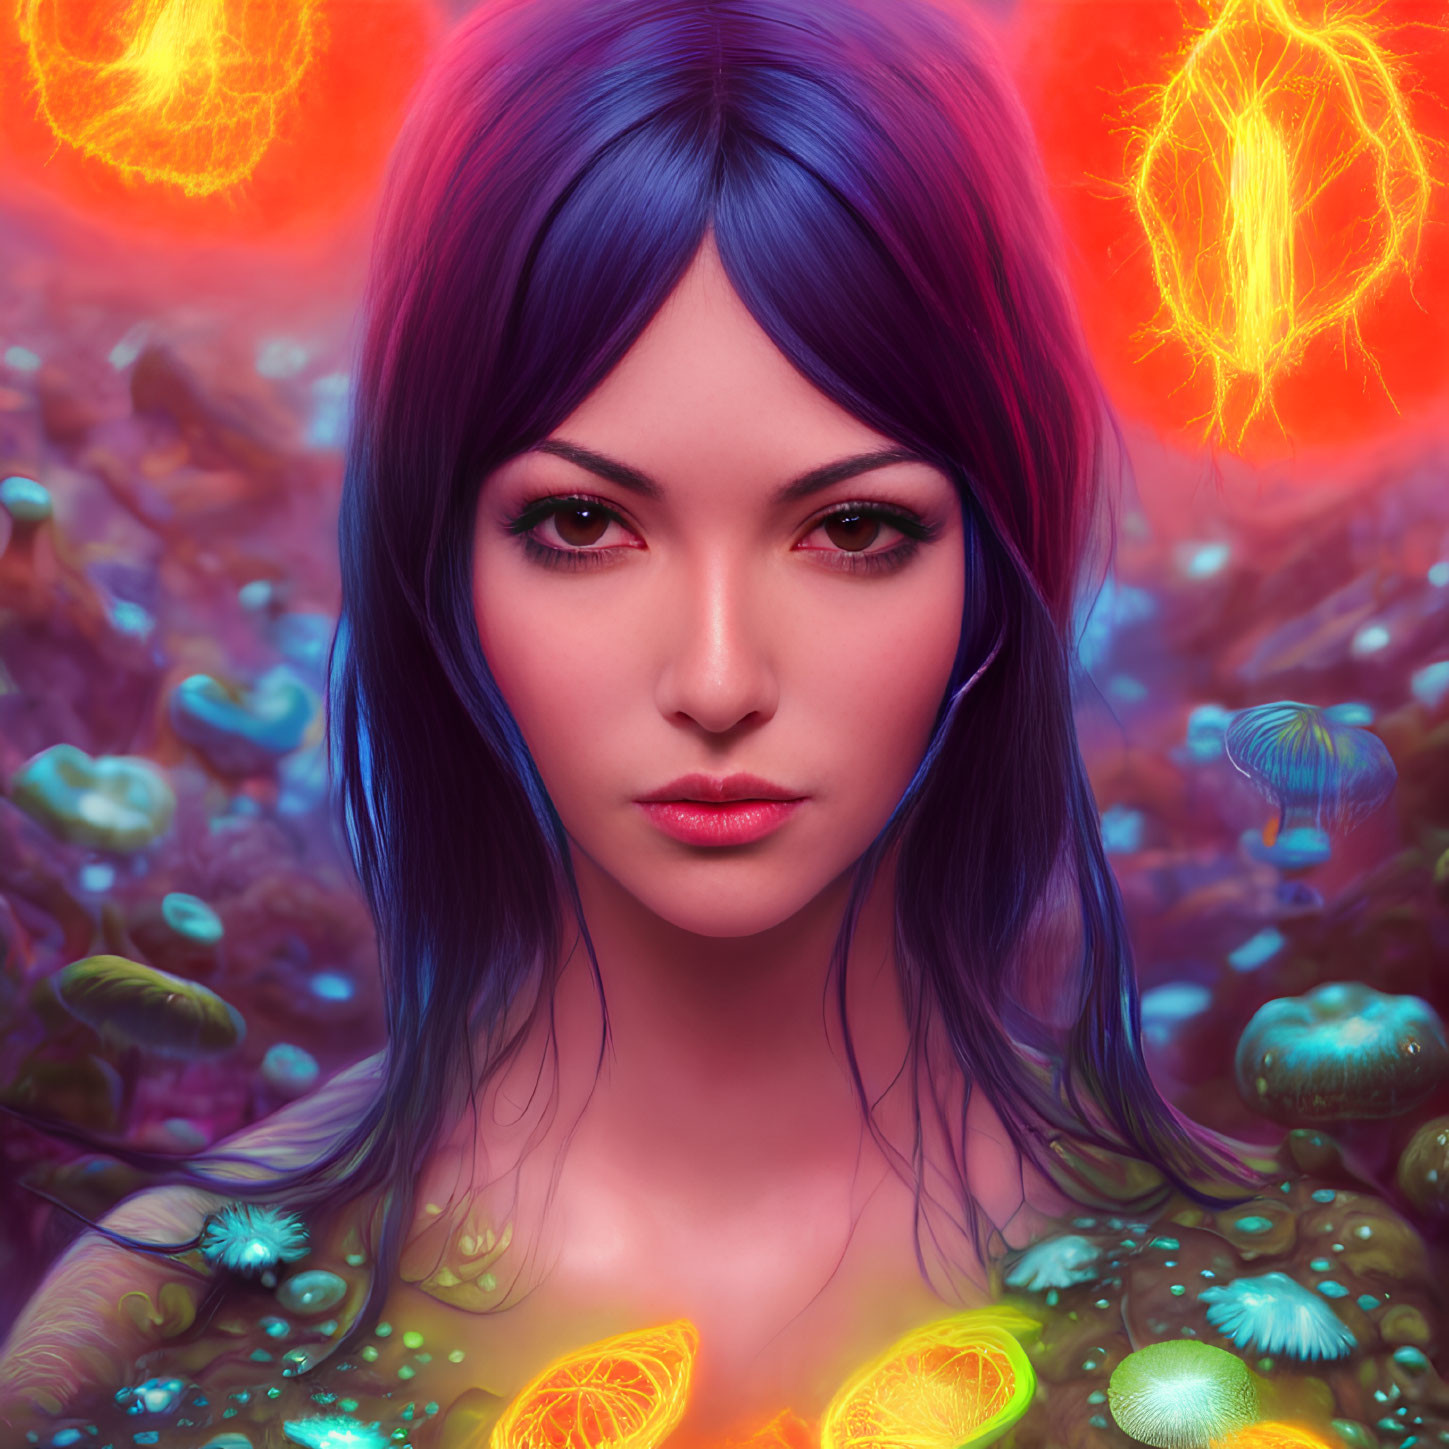 Vibrant digital artwork: Woman with purple and blue hair, surrounded by fantastical flora and glowing